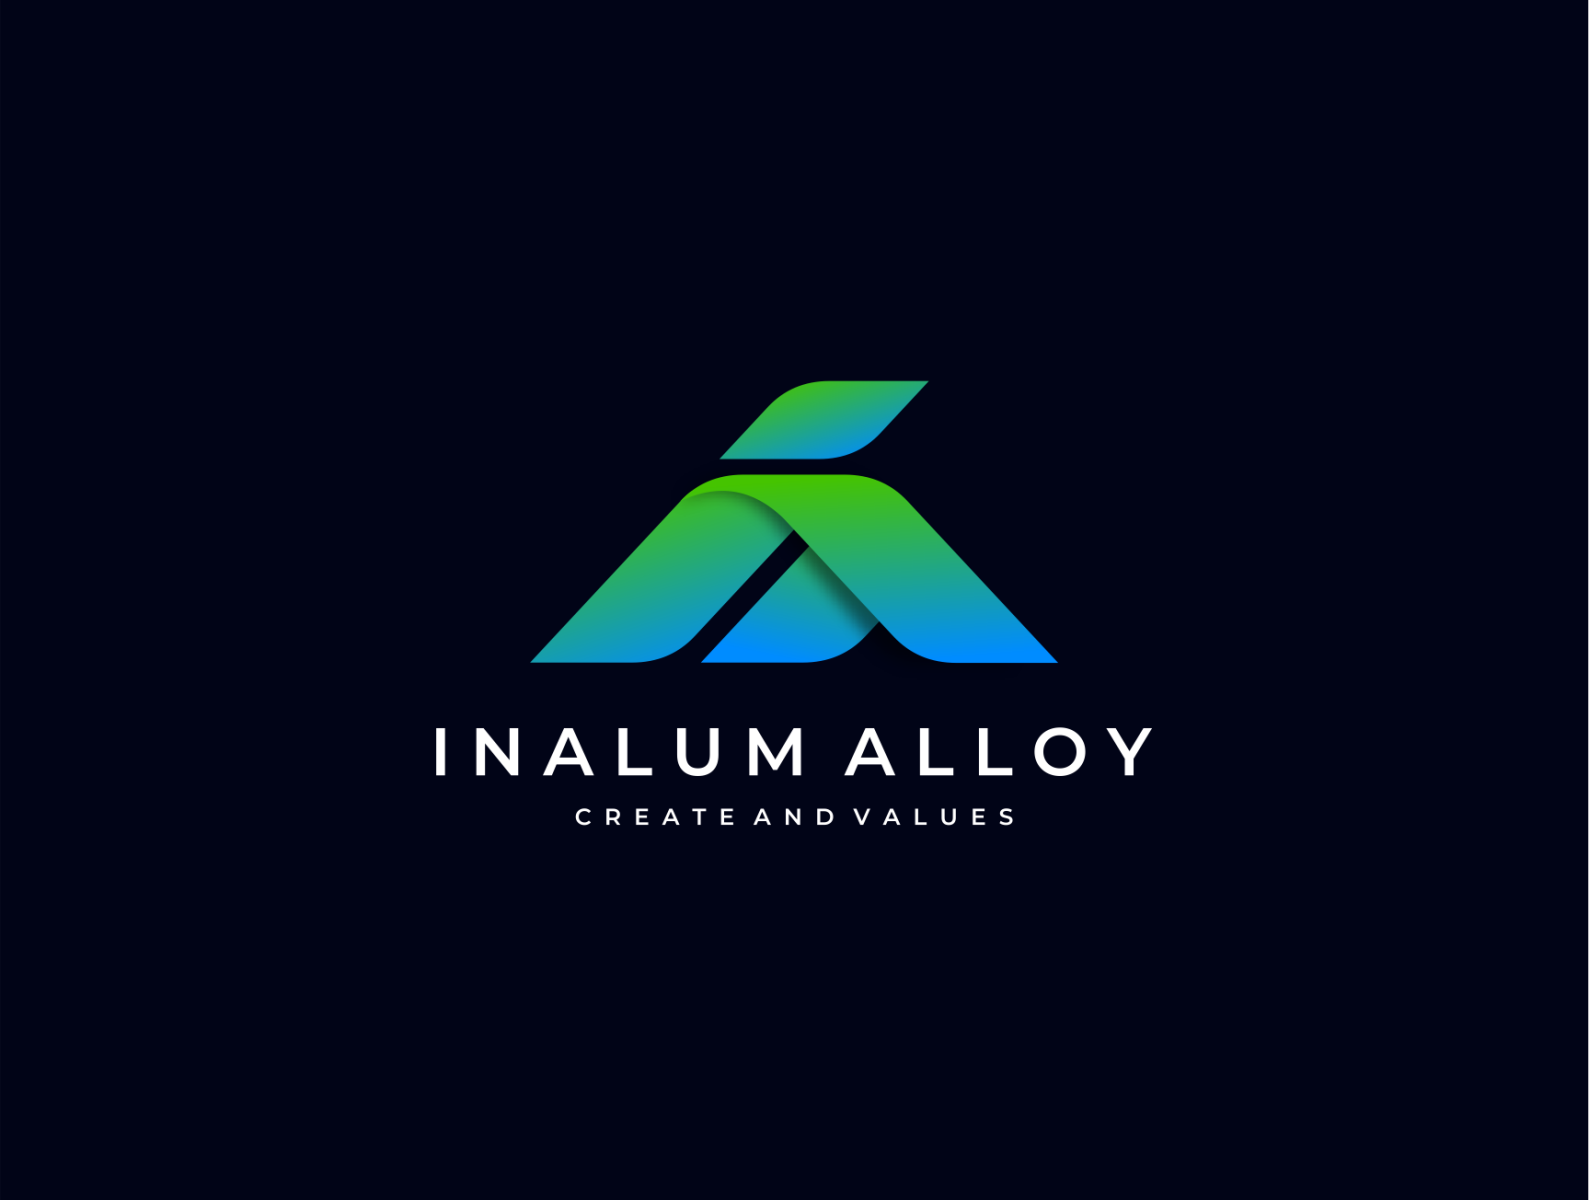 inalum alloy by marshallid on Dribbble